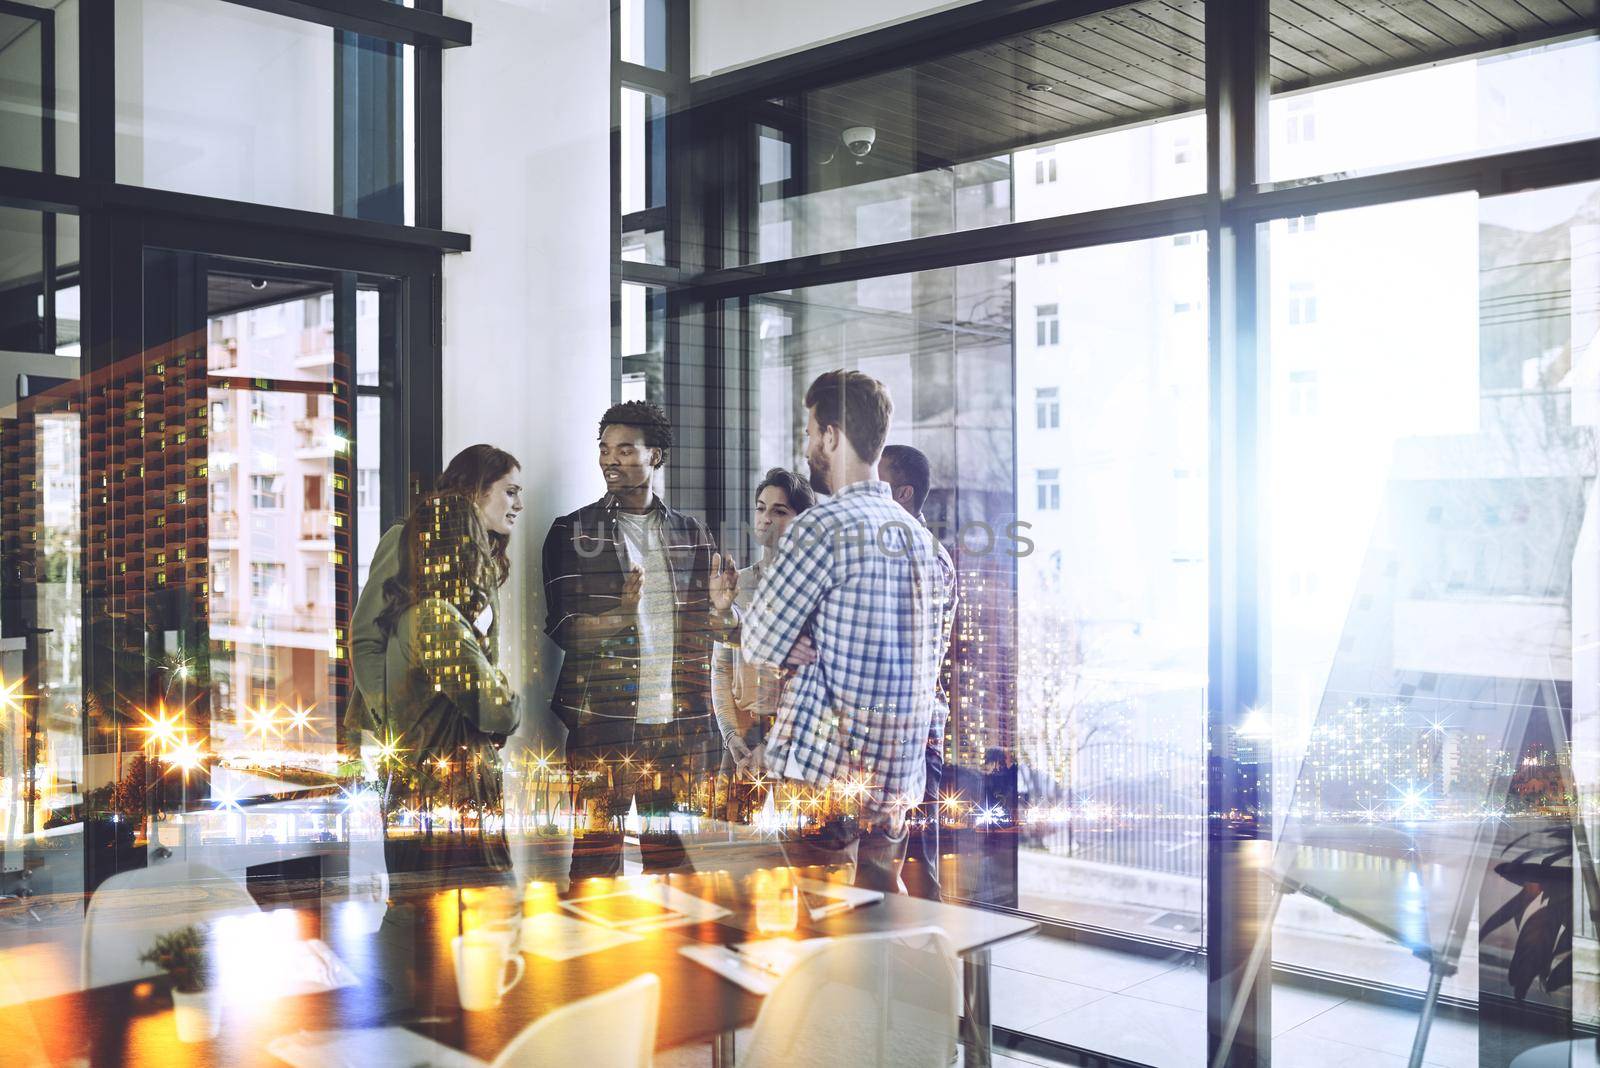 Great minds at work. Multiple exposure shot of businesspeople superimposed over a cityscape